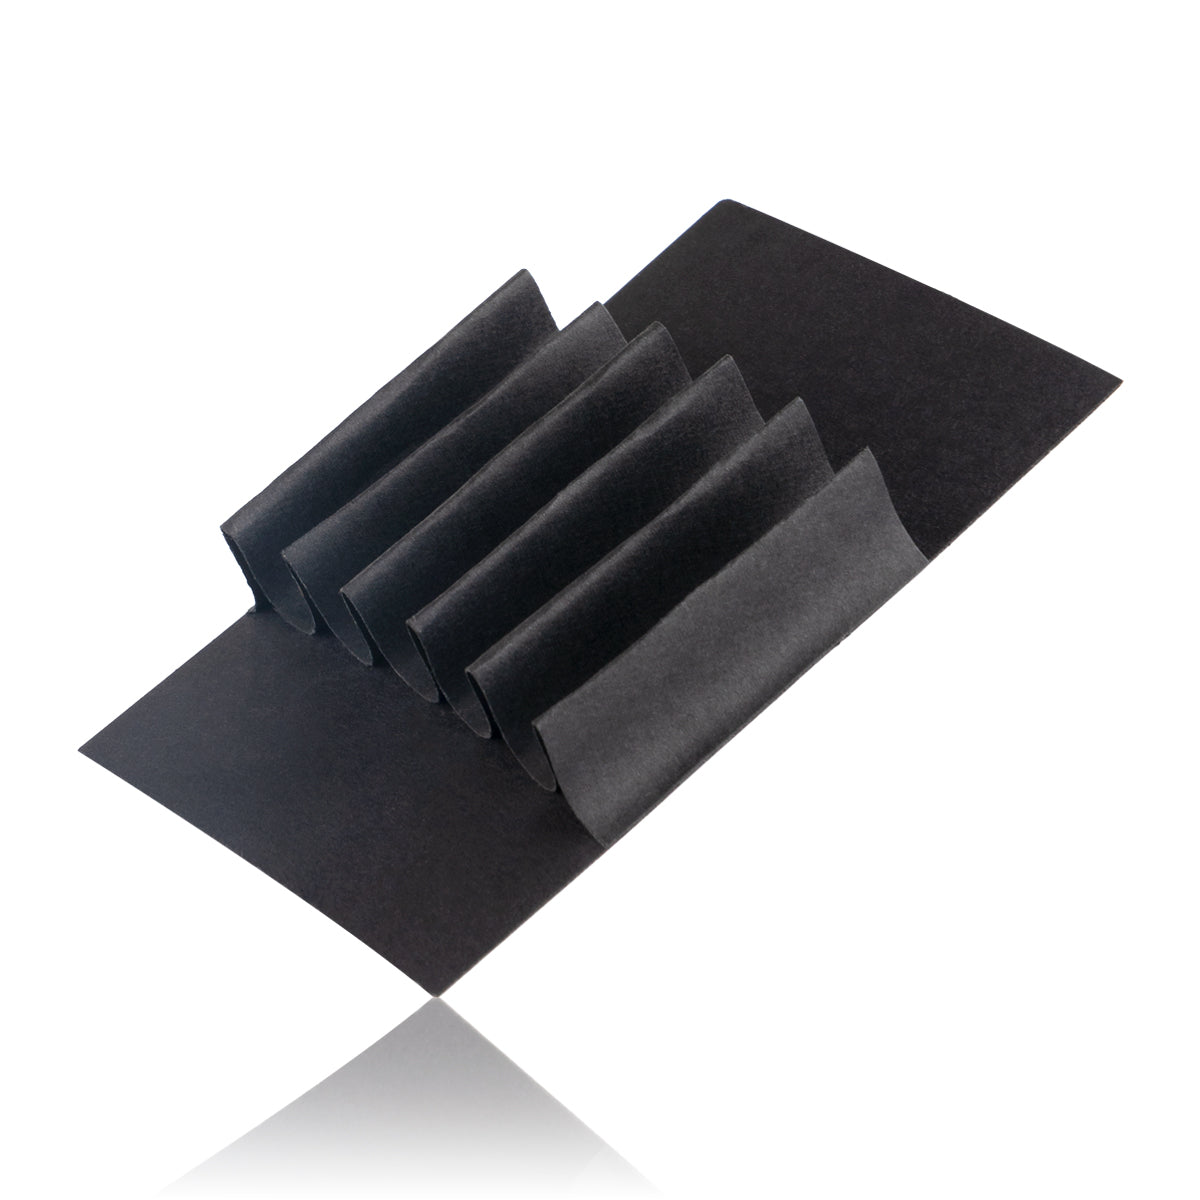 CRATIV Edible & Joint Box Insert Tray for 5 Small Pre-Rolled Cones | Black - 500 Count  Biohazard Inc   